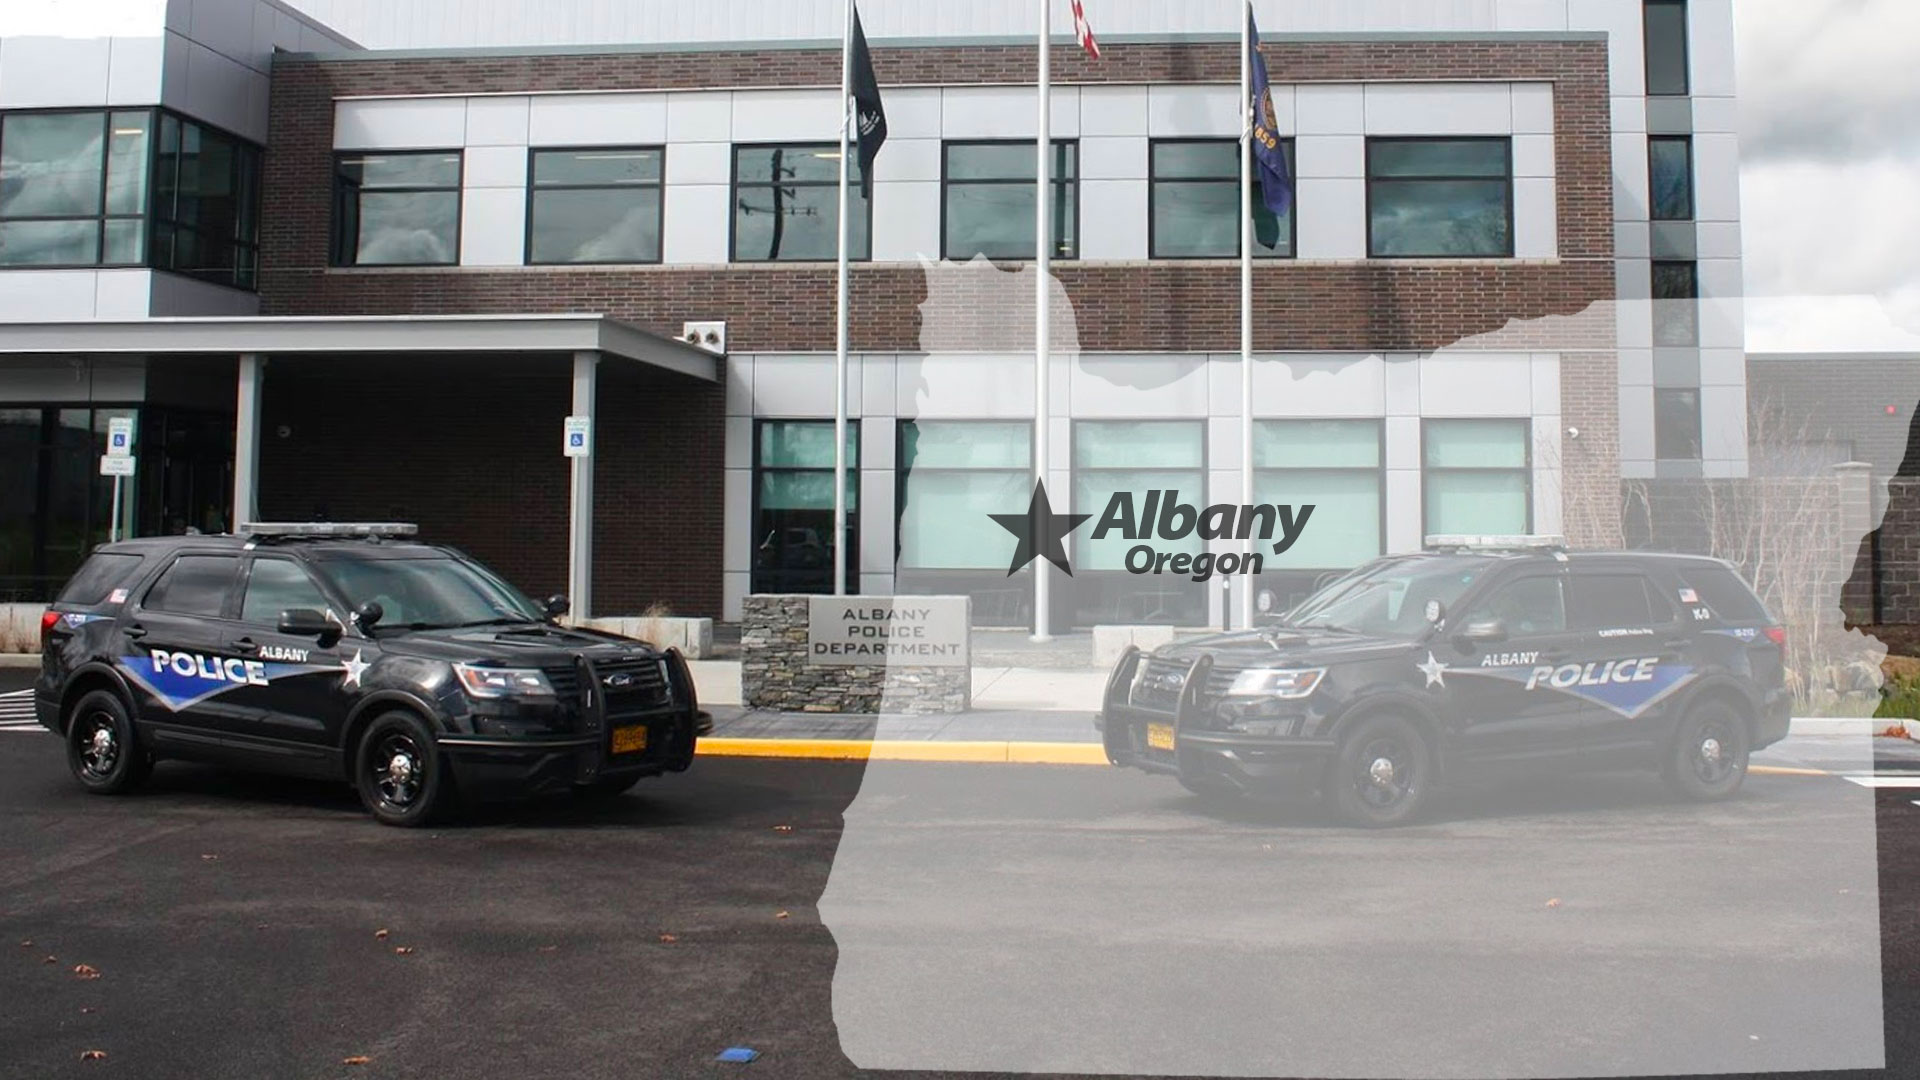 Image of City of Albany Police Department